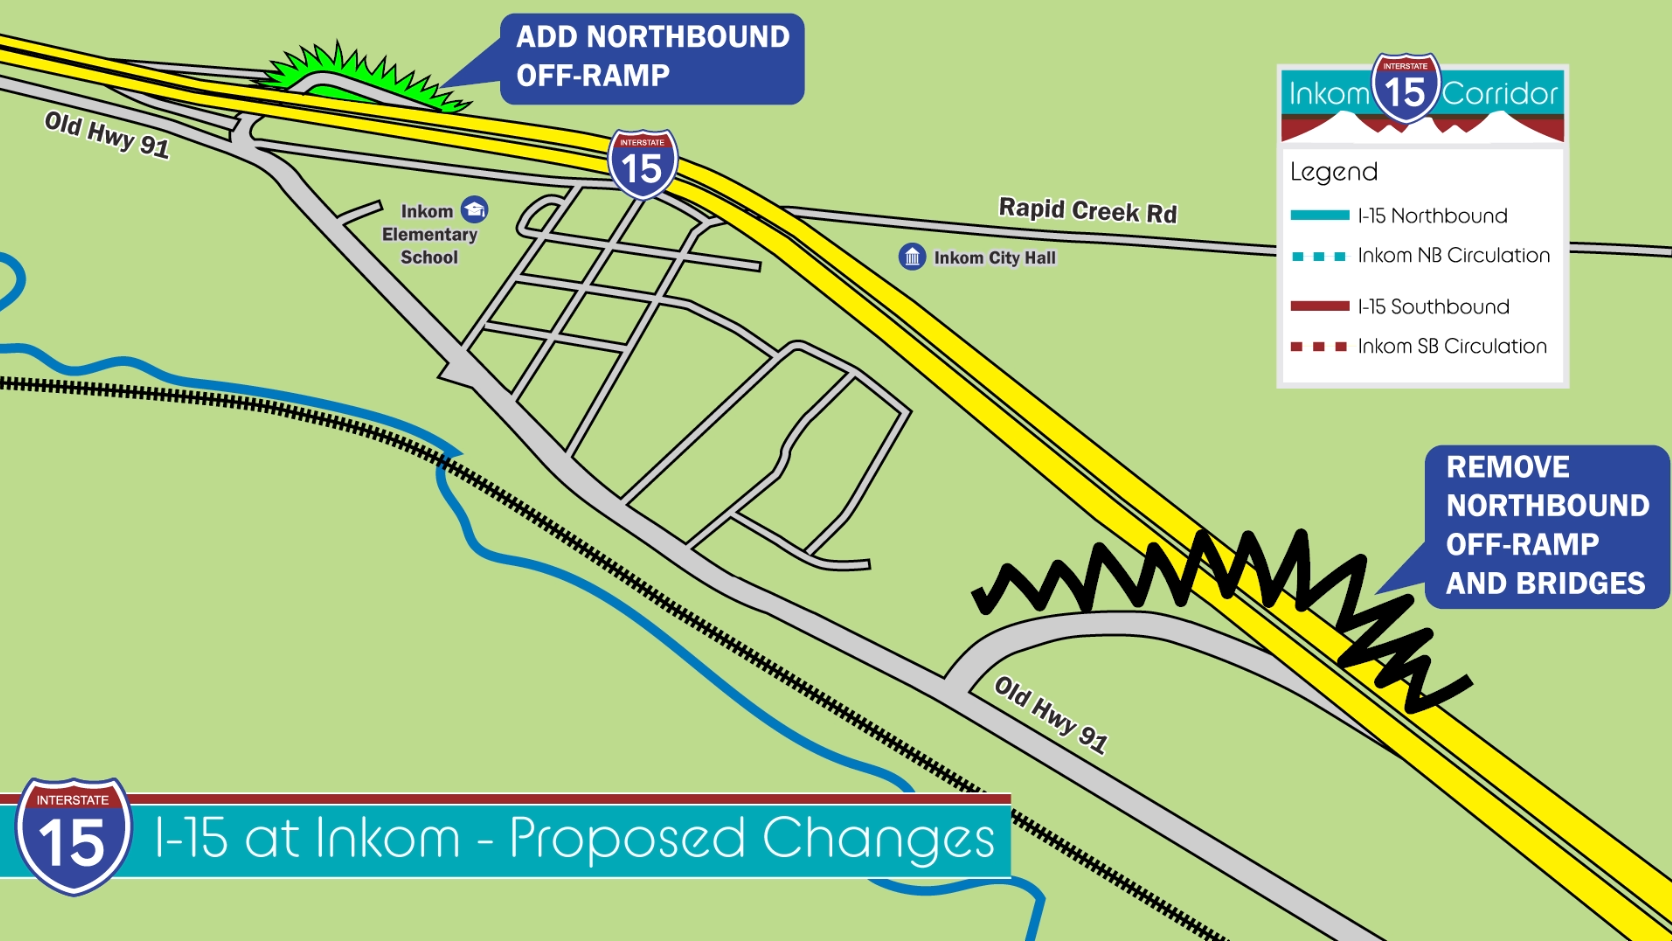 Map of proposed changes to Interstate 15 at Inkom west and east interchanges.